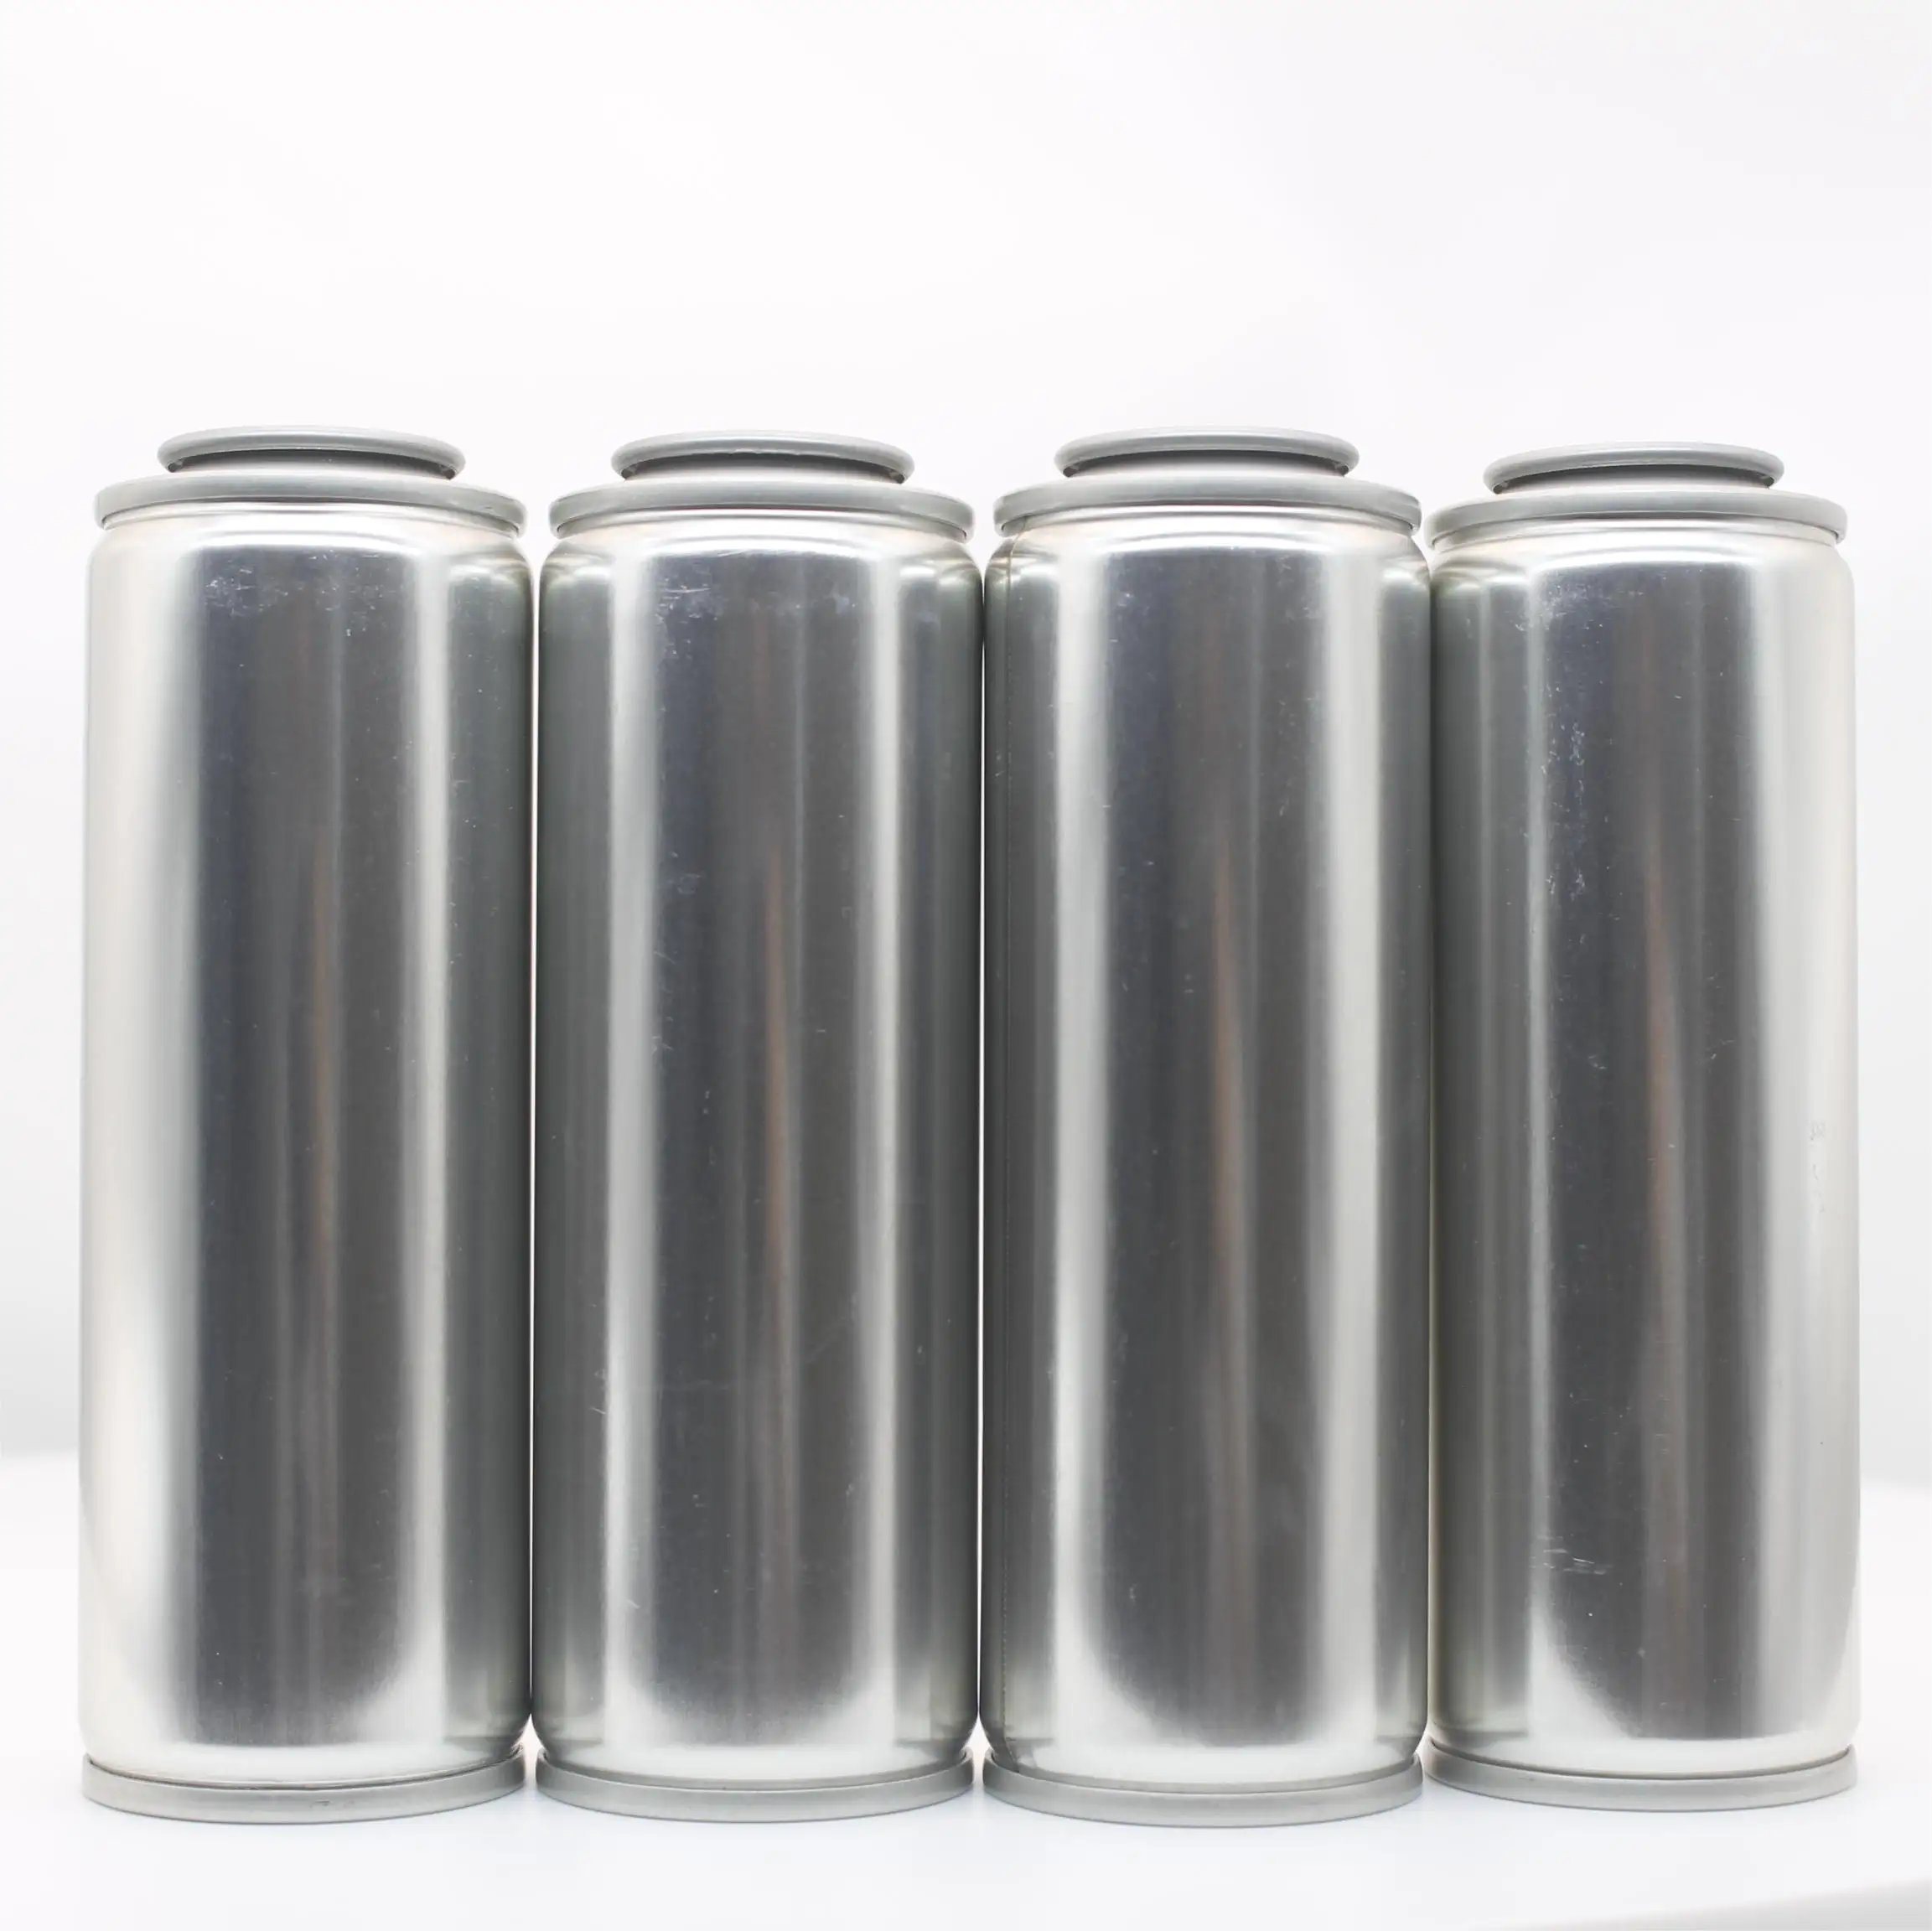 Hot sale Empty Tinplate Cans 65mm CMYK Printing 159mm straight body Butane Gas Can empty aerosol can